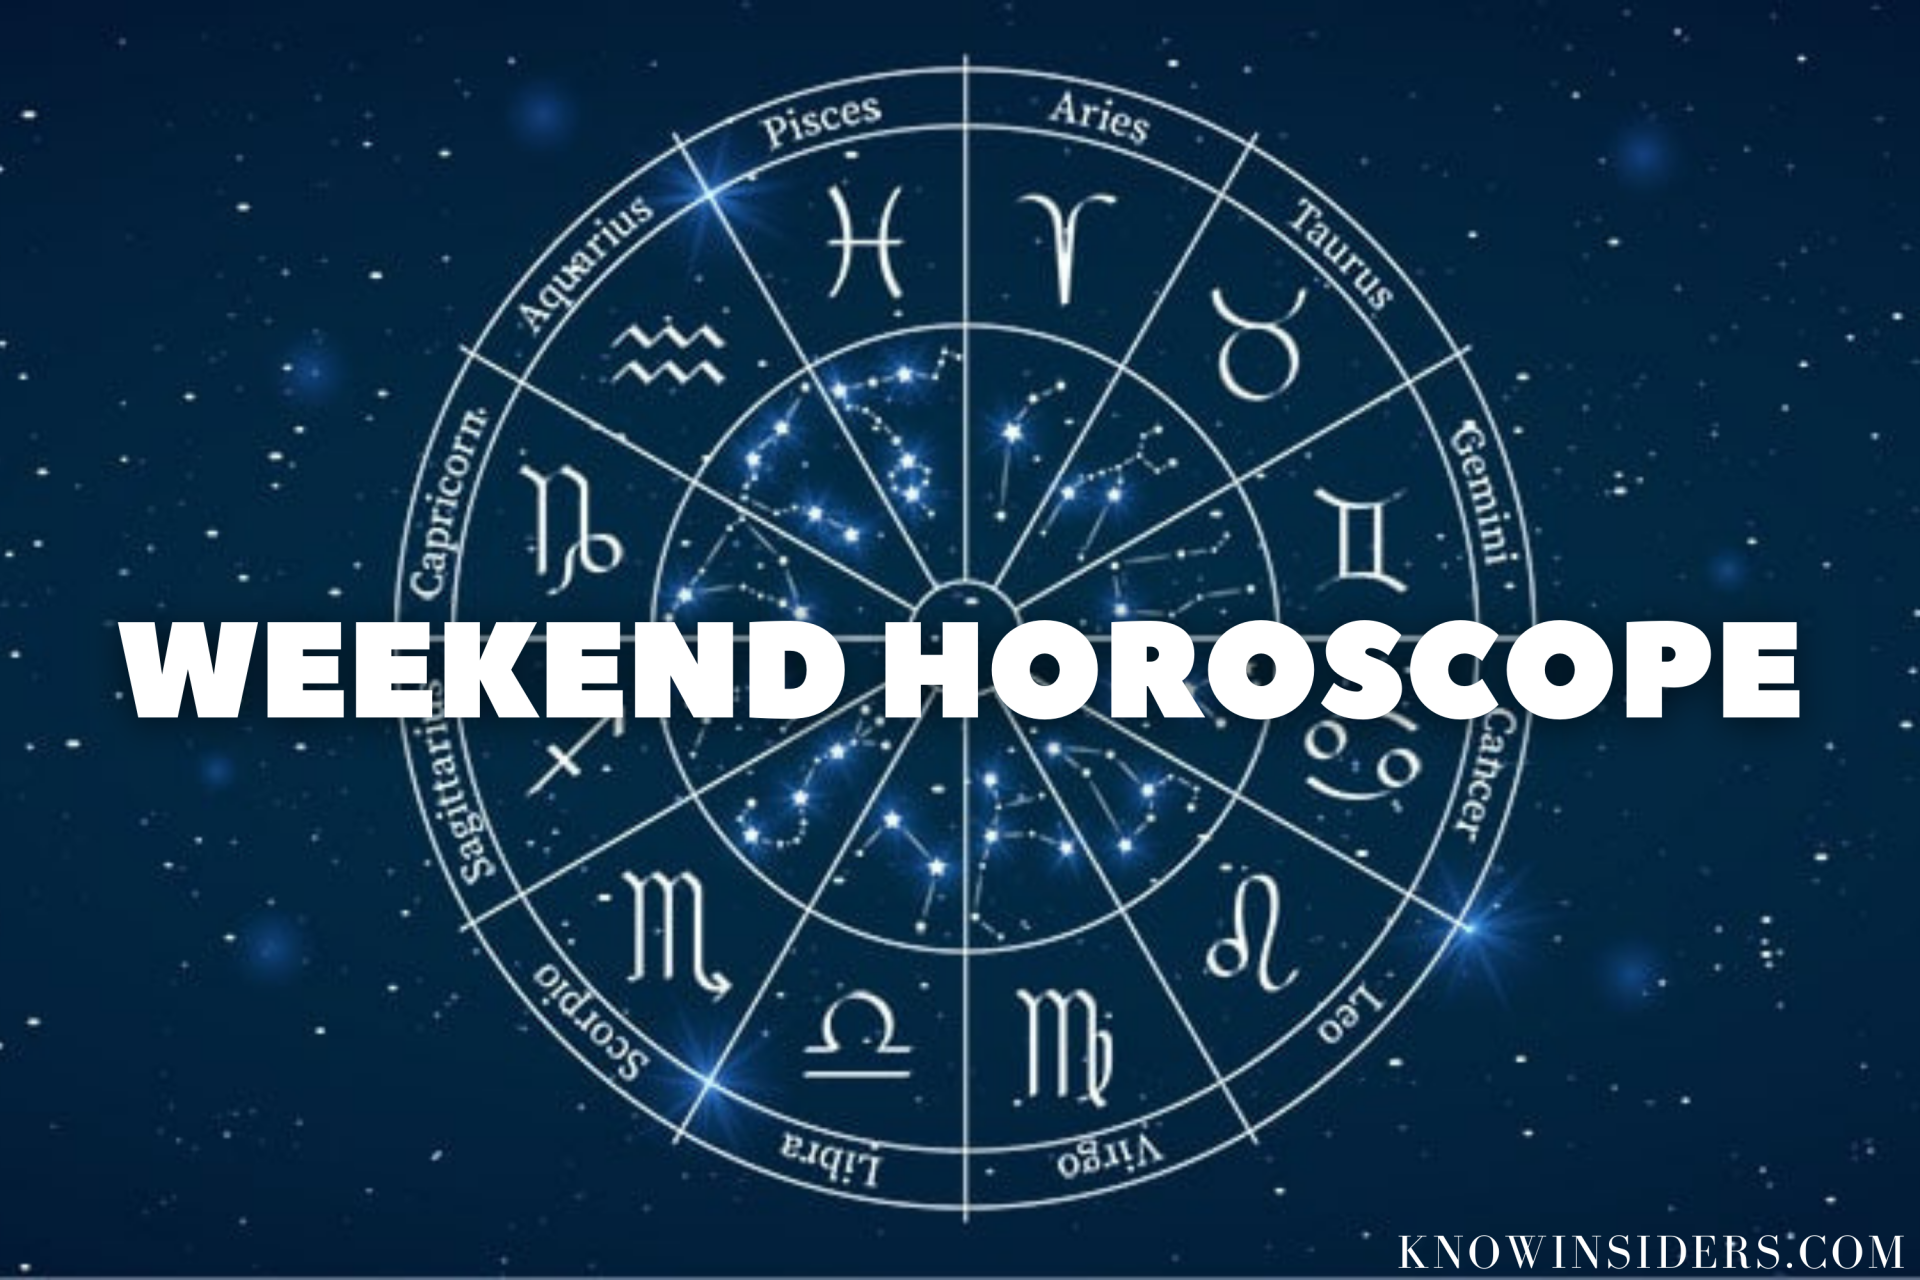 Weekend Horoscope (April 23-25): Predictions for All 12 Zodiac Signs